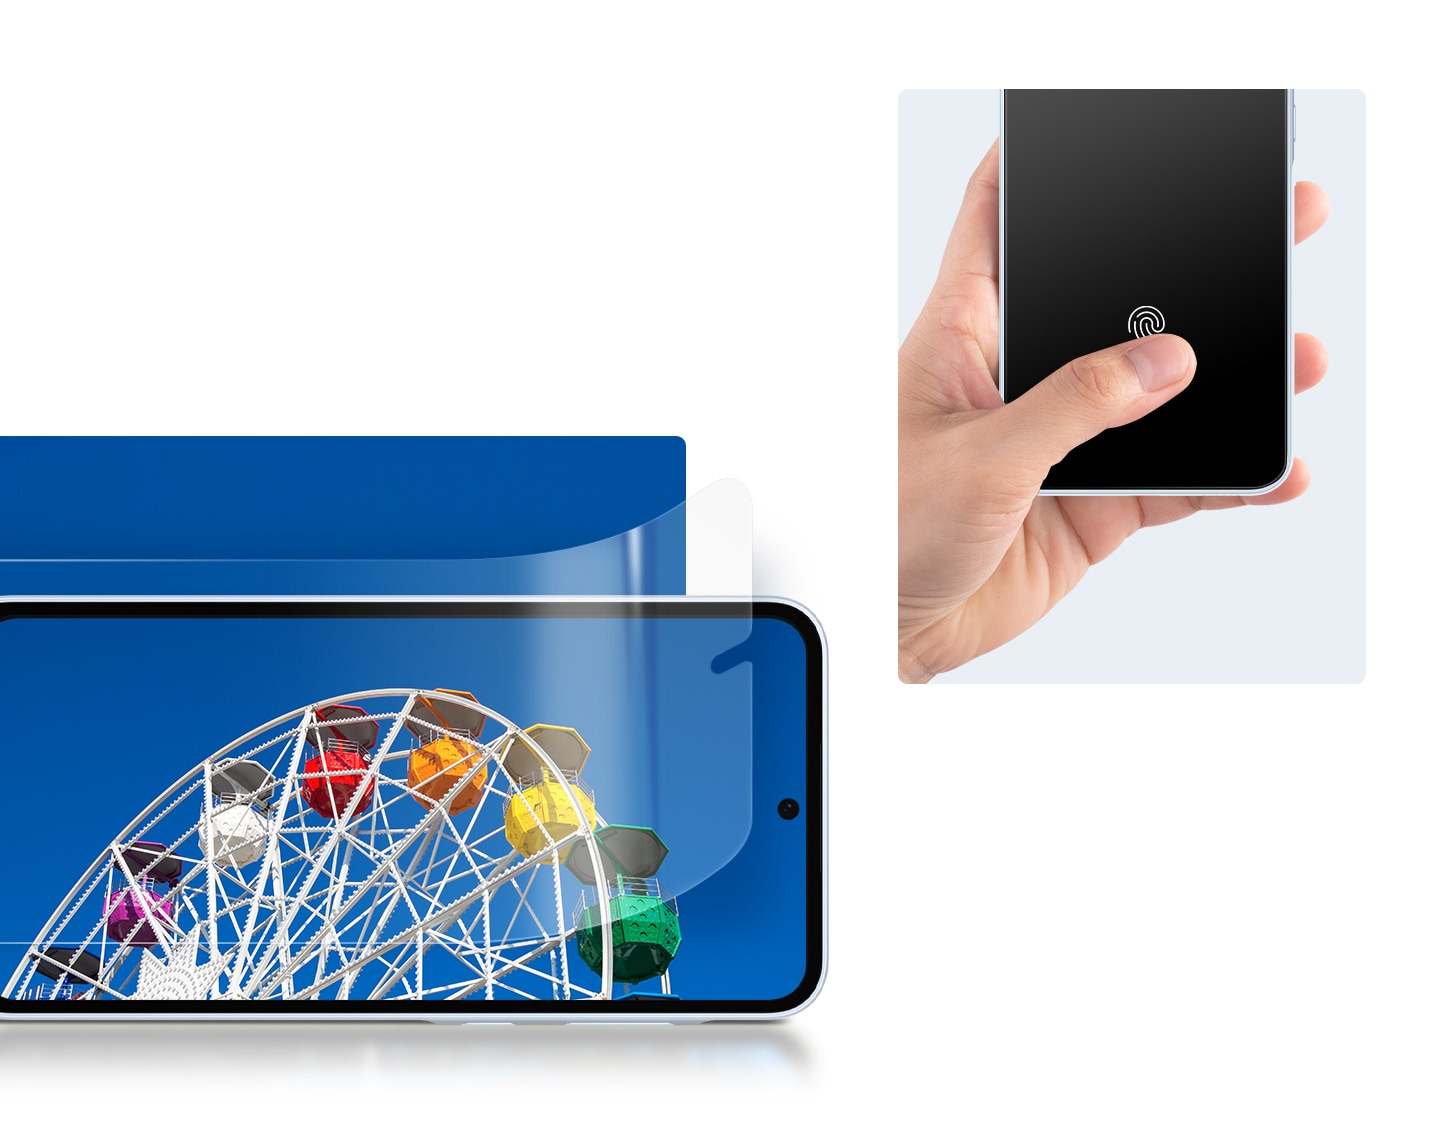 A Galaxy device showing a colorful ferris wheel under a bright, blue sky has a Screen Protector film being installed. A hand holding a Galaxy device with a Screen Protector film installed is touching the fingerprint sensor area with a thumb.